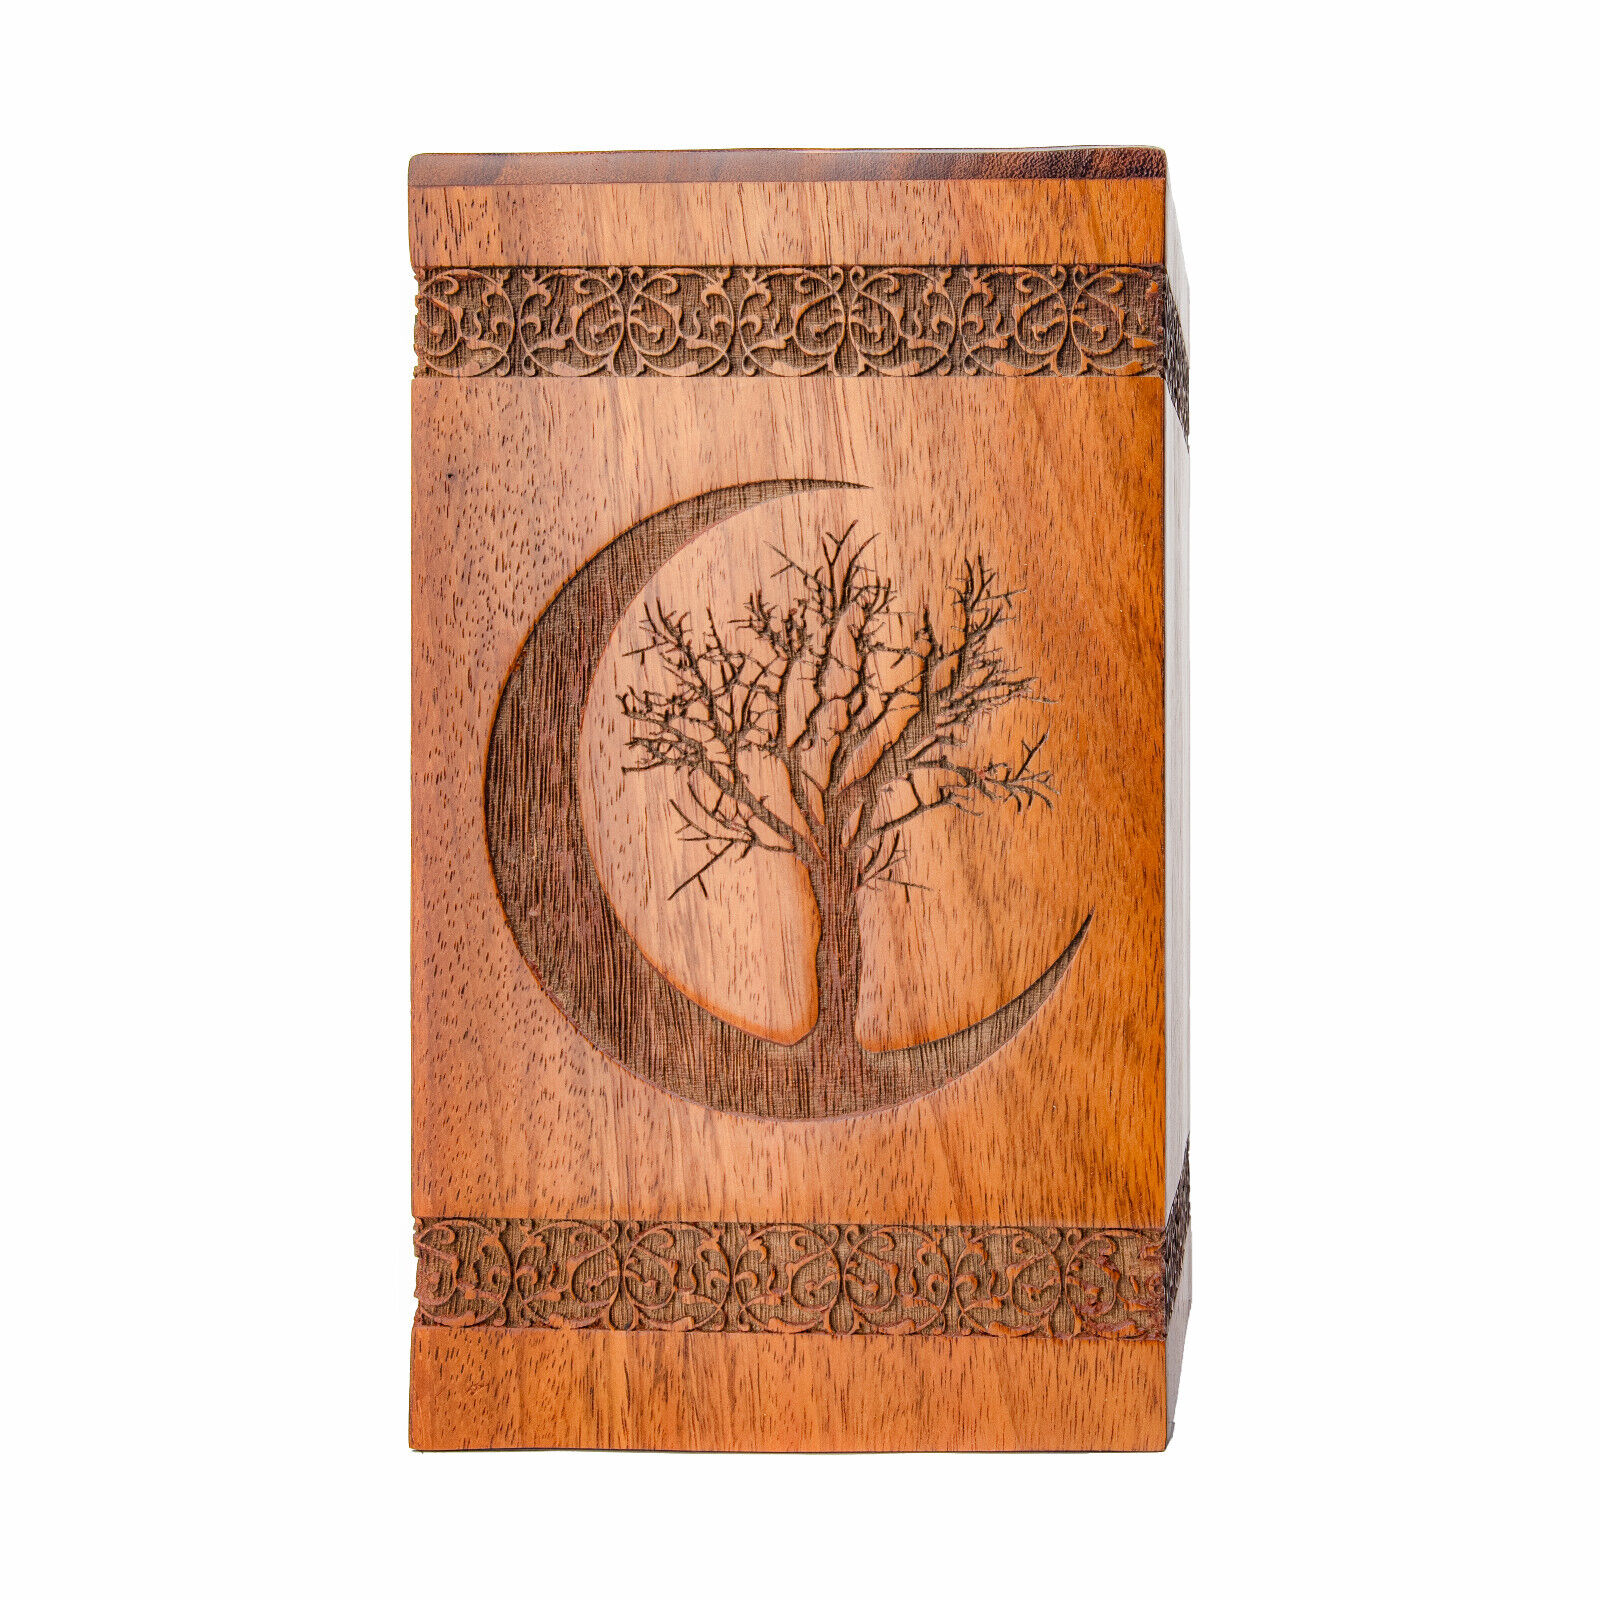 Displayex India Engraved Tree of Life Wooden Urns for Human Ashes Adult Male